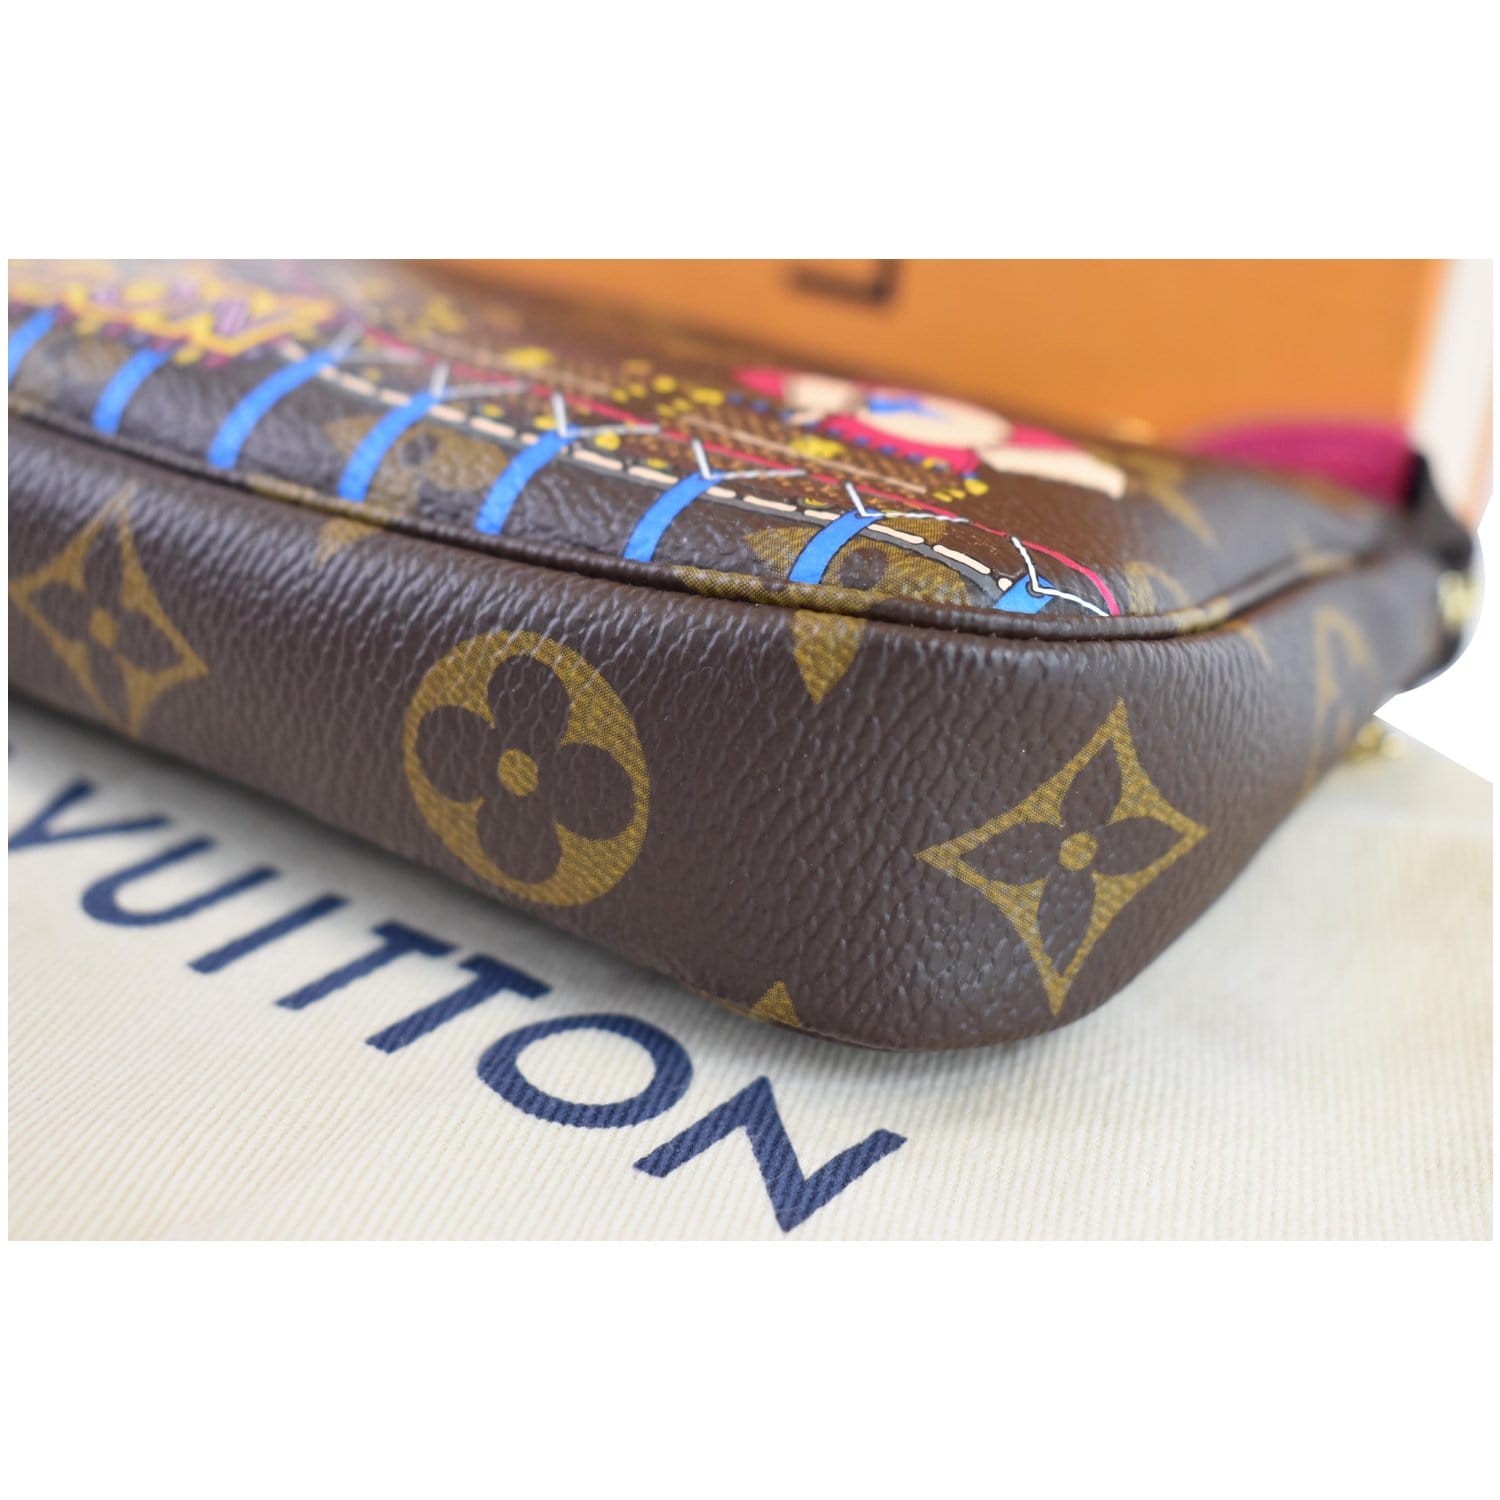 Louis Vuitton 2014 Pre-owned Christmas Animation Mini Pochette Accessories - Brown